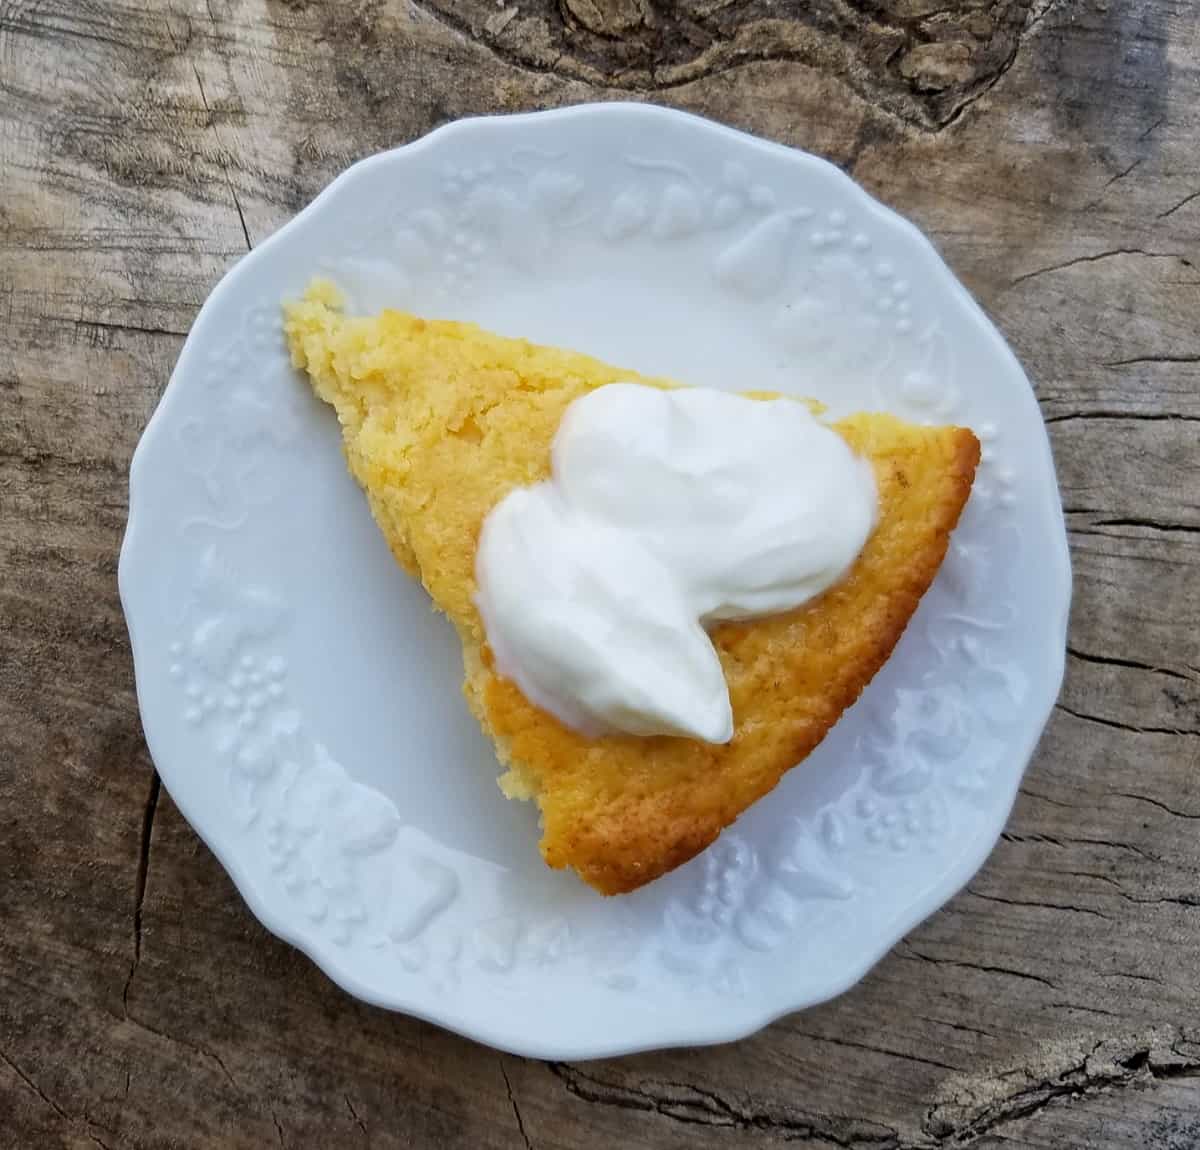 Piece of pineapple yogurt cake topped with whipped cream on small white plate.